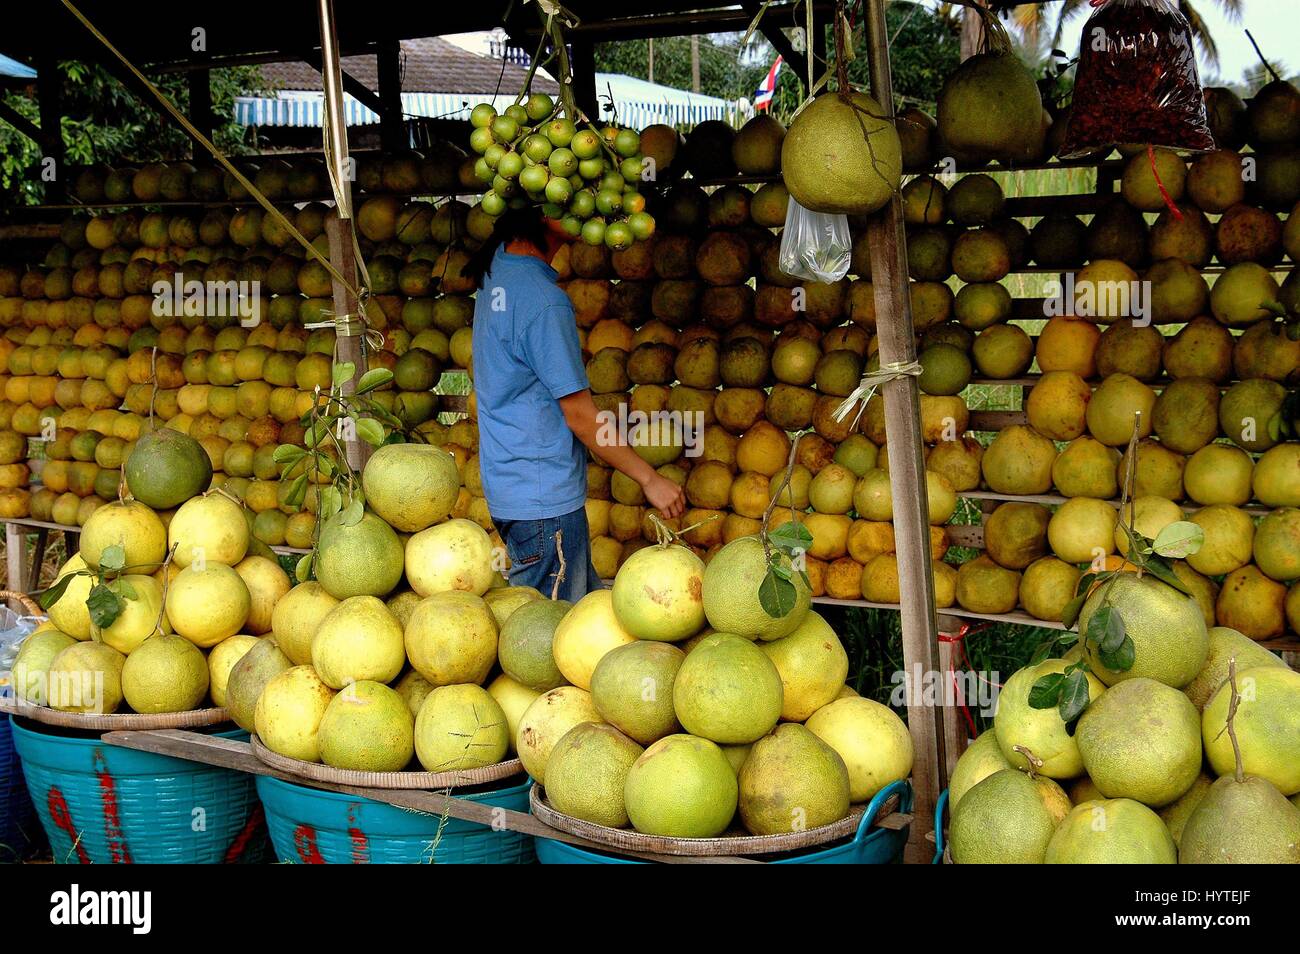 Nakhon Pathom, Thailand - December 27, 2005:  Locally grown Pomelo fruits for sale at a vendor's roadside fruit stand Stock Photo